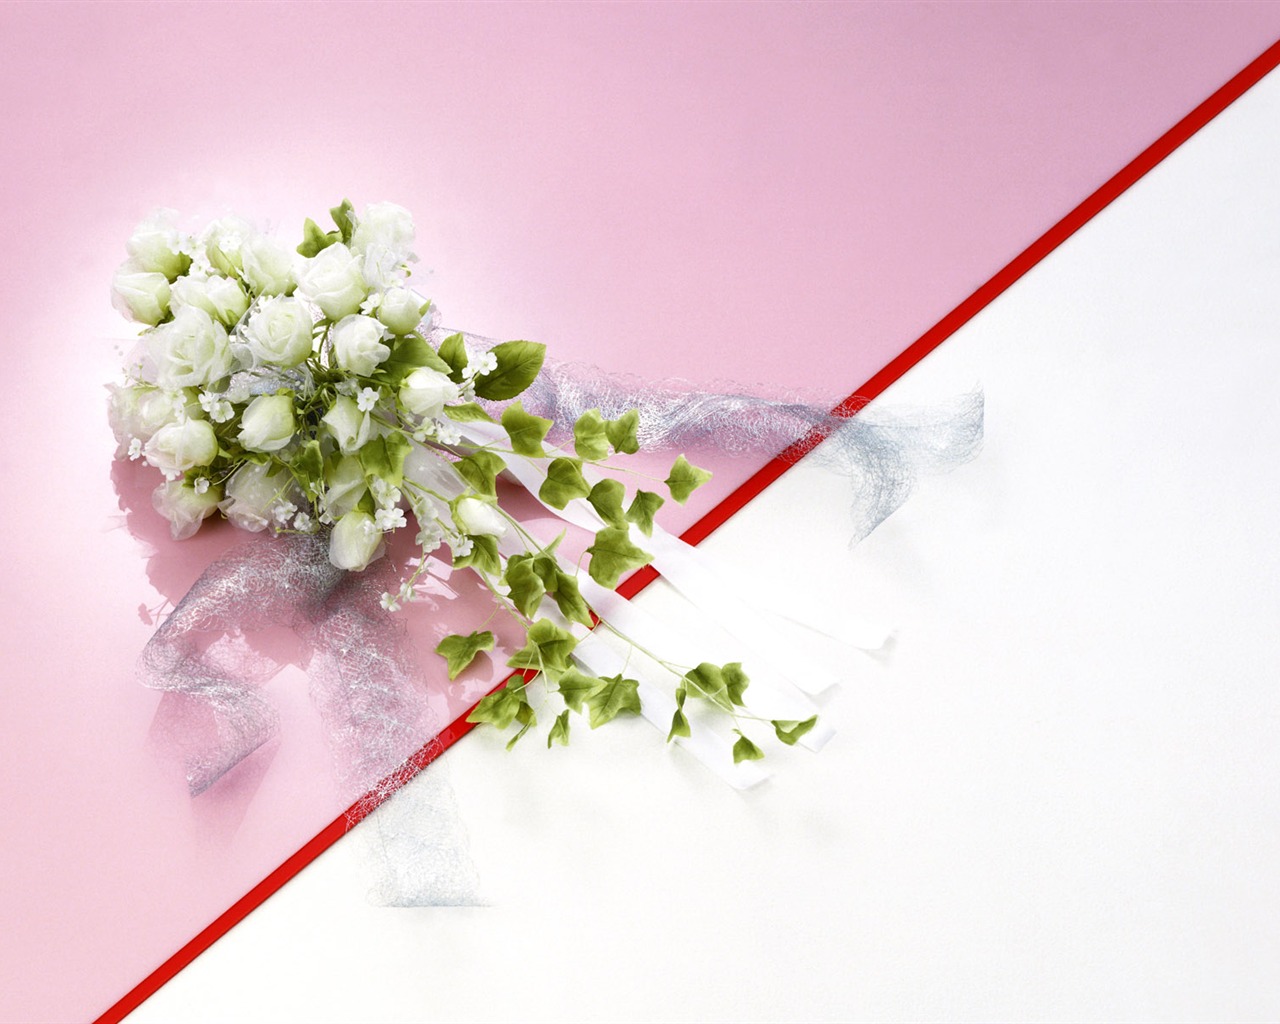 Wedding Flowers items wallpapers (1) #17 - 1280x1024